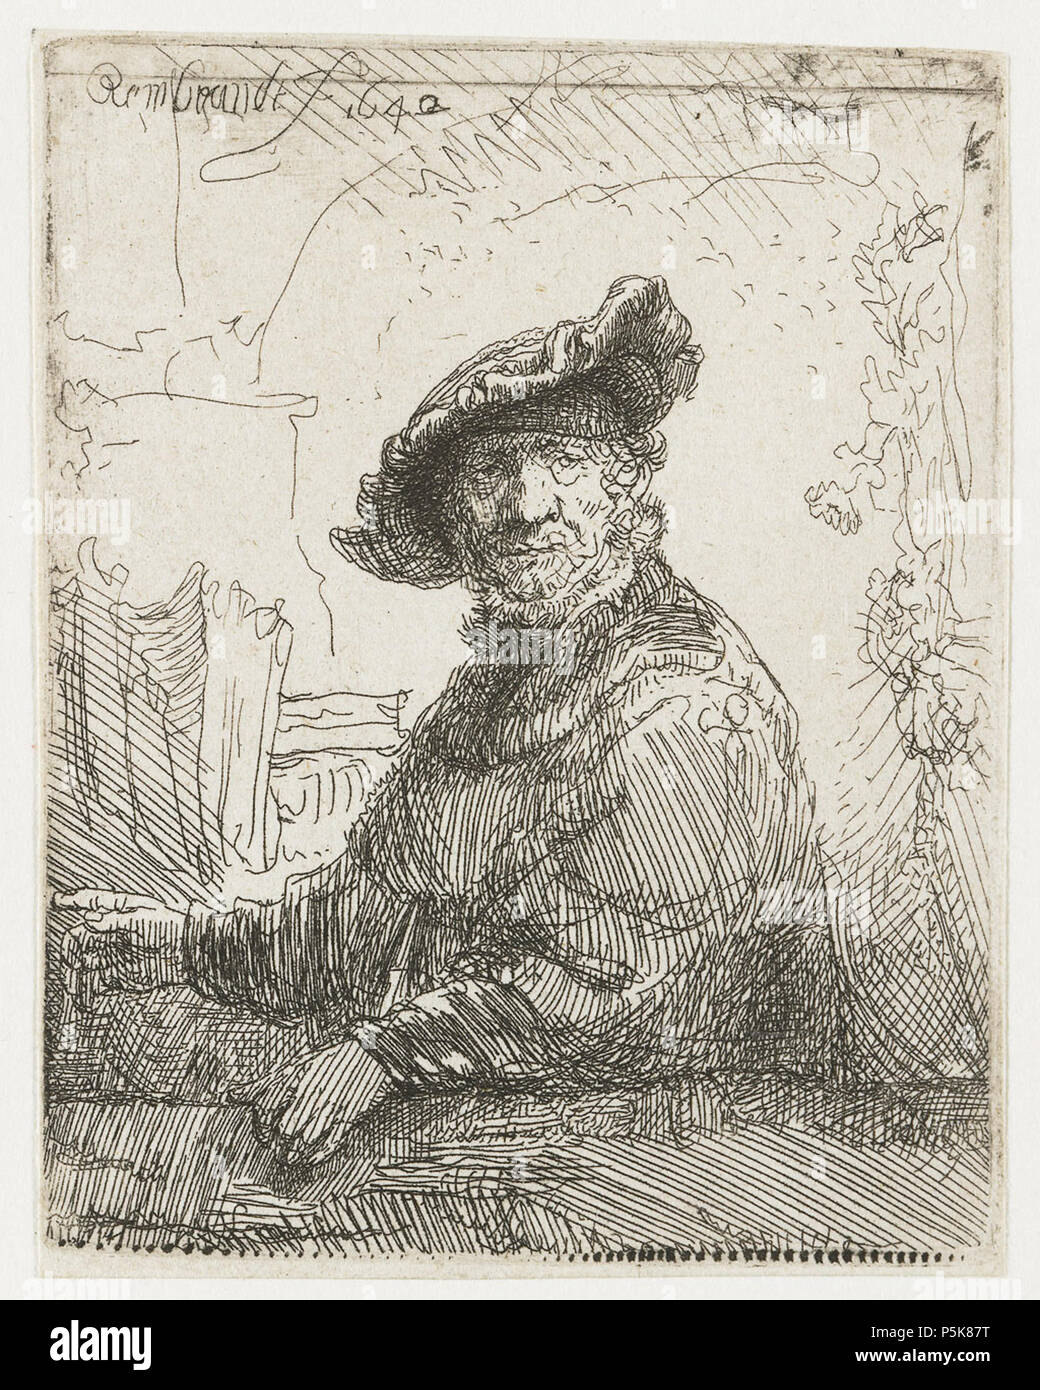 Man in an Arbor  1642. N/A 159 B257 Rembrandt Stock Photo